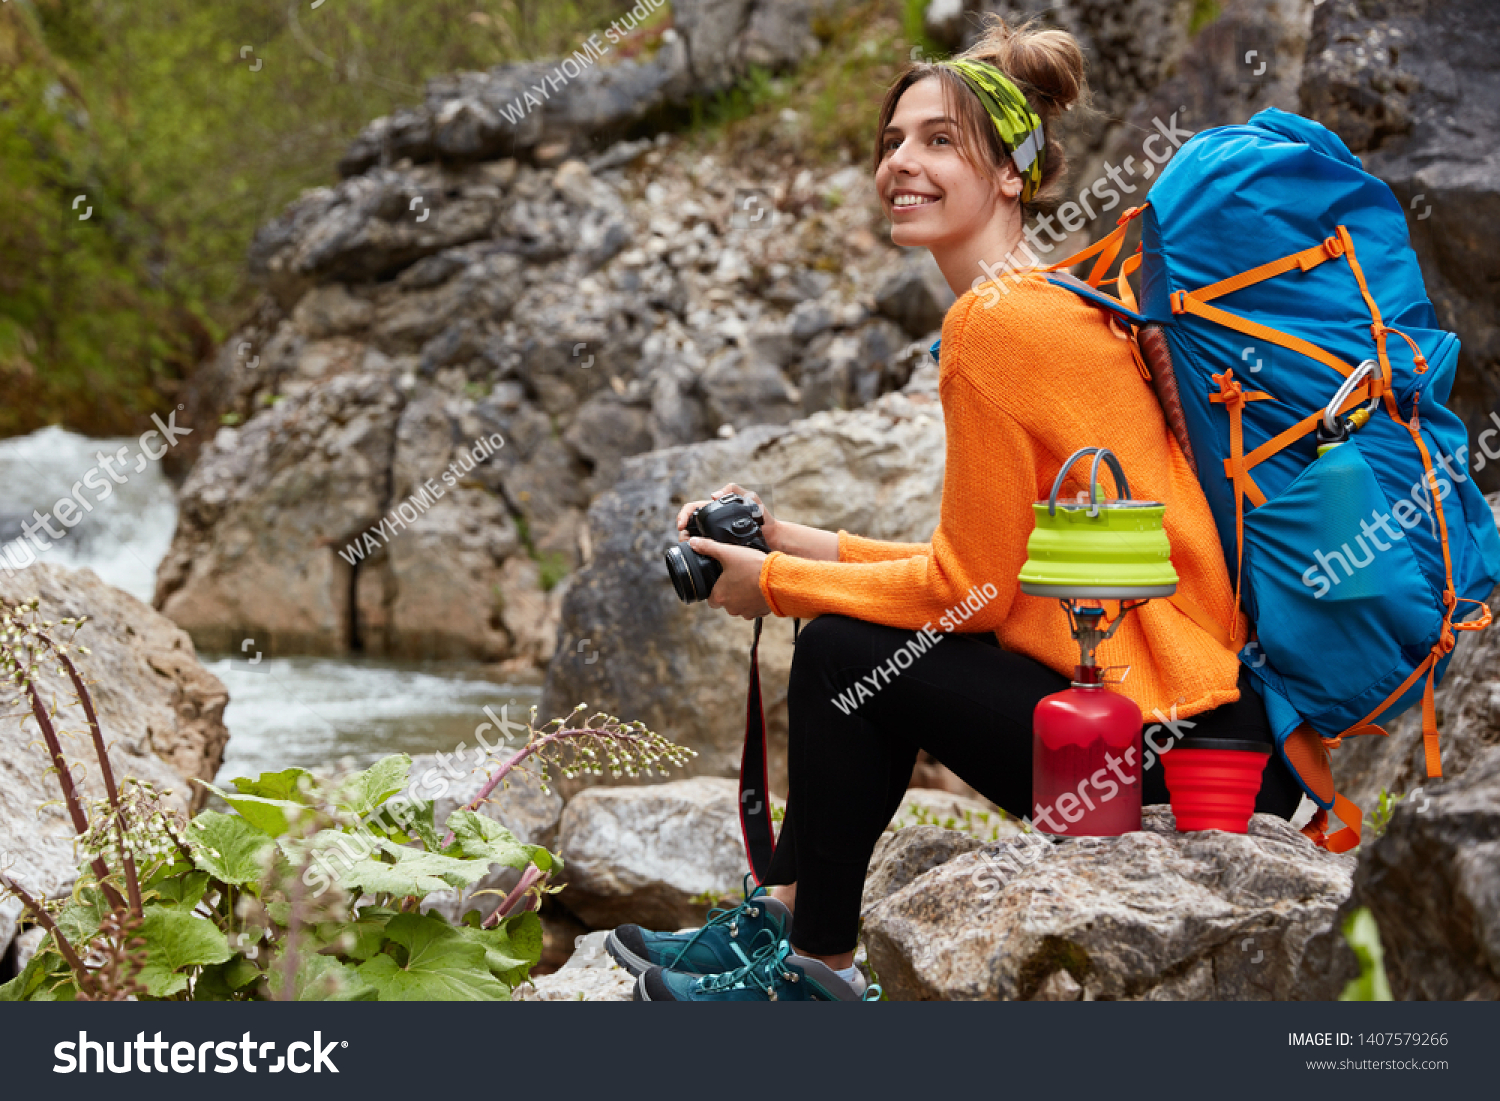 Horizontal view of cheerful pleased woman sits near rock pool, holds modern camera, prepares hot drink, enjoys camping and traveling, wears active wear, has rucksack on back. Rest, lifestyle, trekking #1407579266